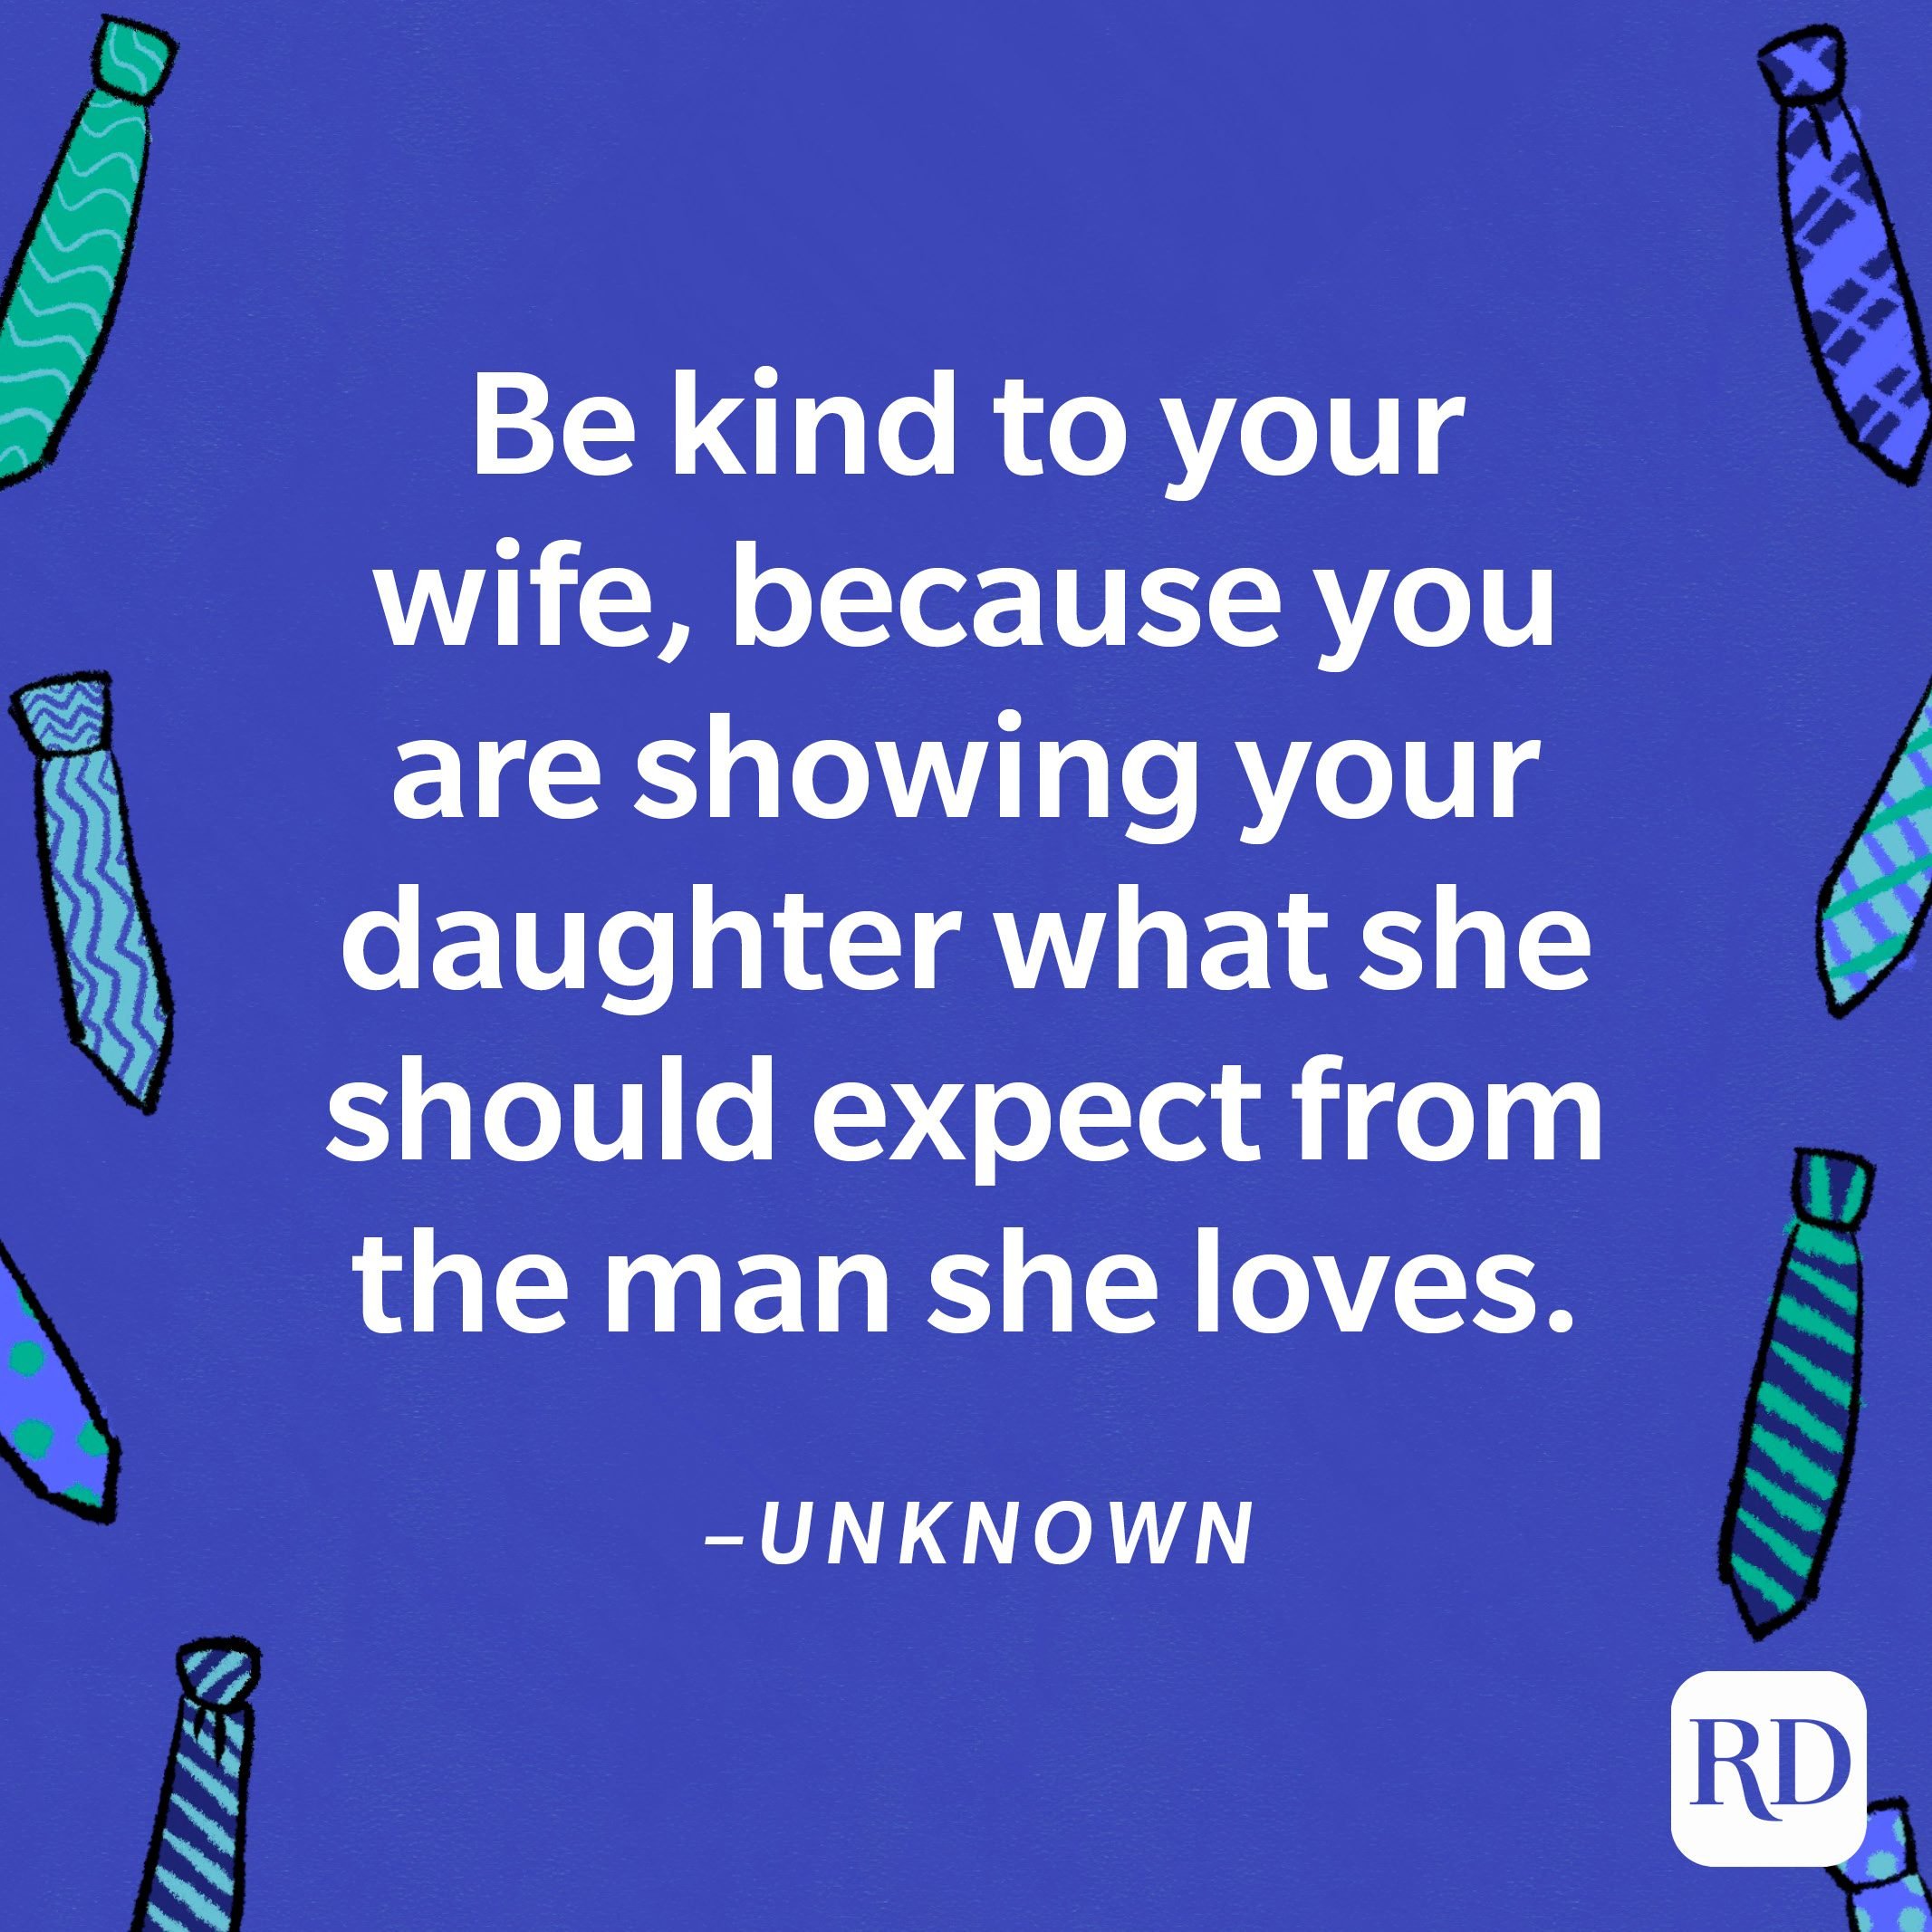 "Be kind to your wife, because you are showing your daughter what she should expect from the man she loves."—Unknown